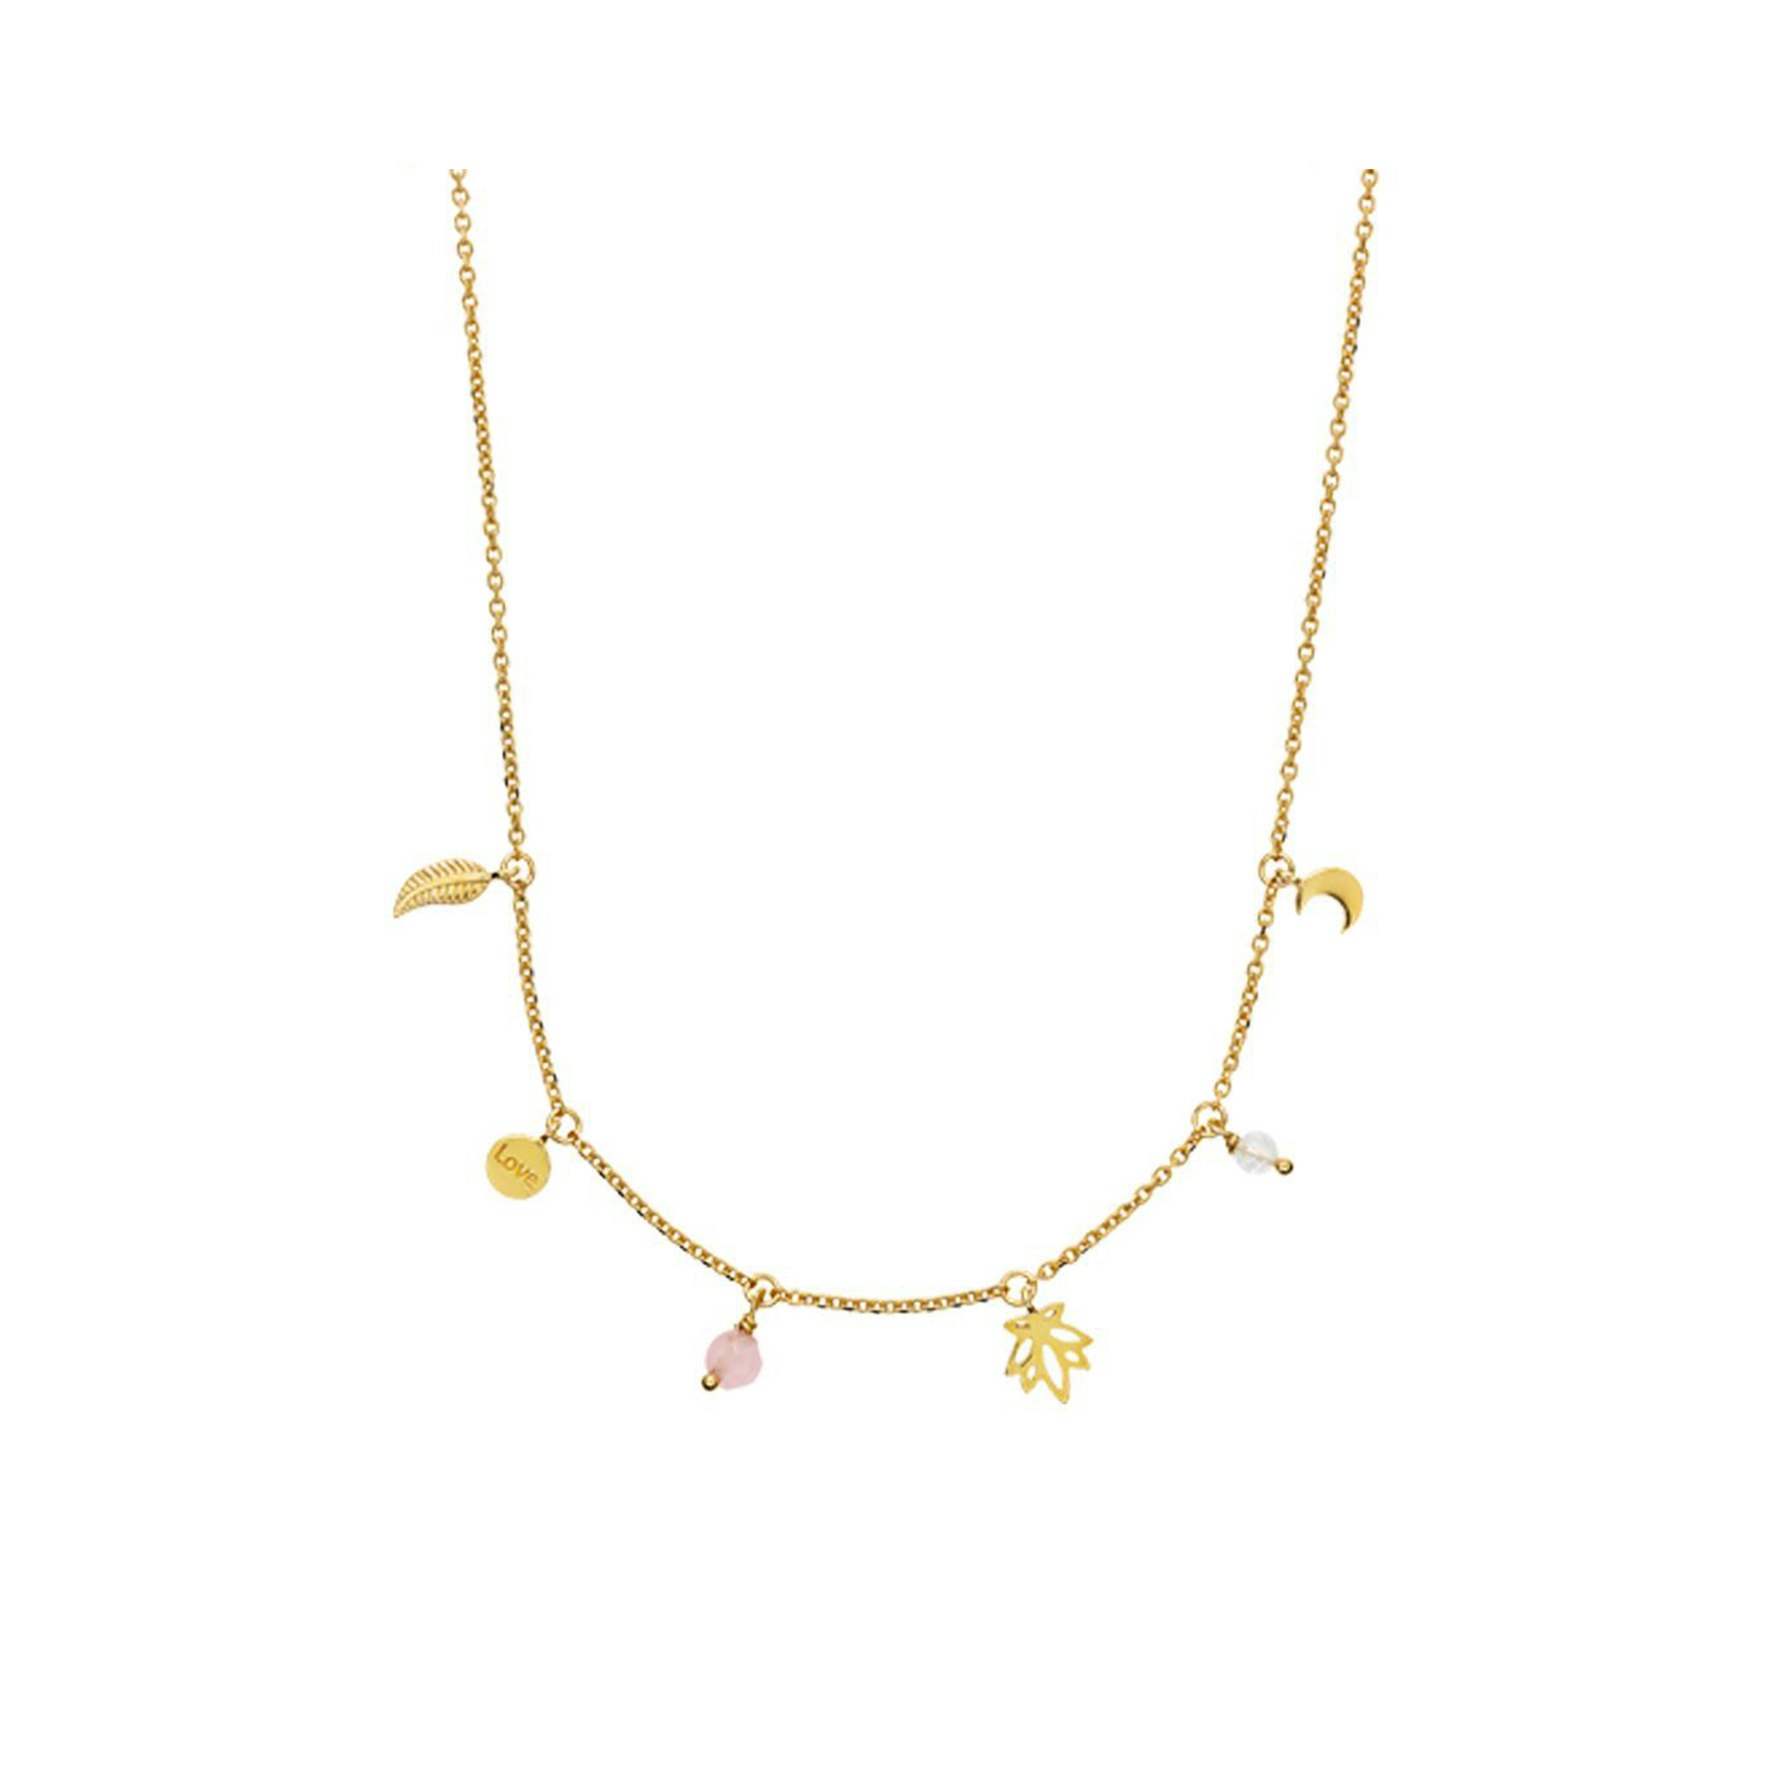 Mie Moltke Necklace from Izabel Camille in Goldplated Silver Sterling 925